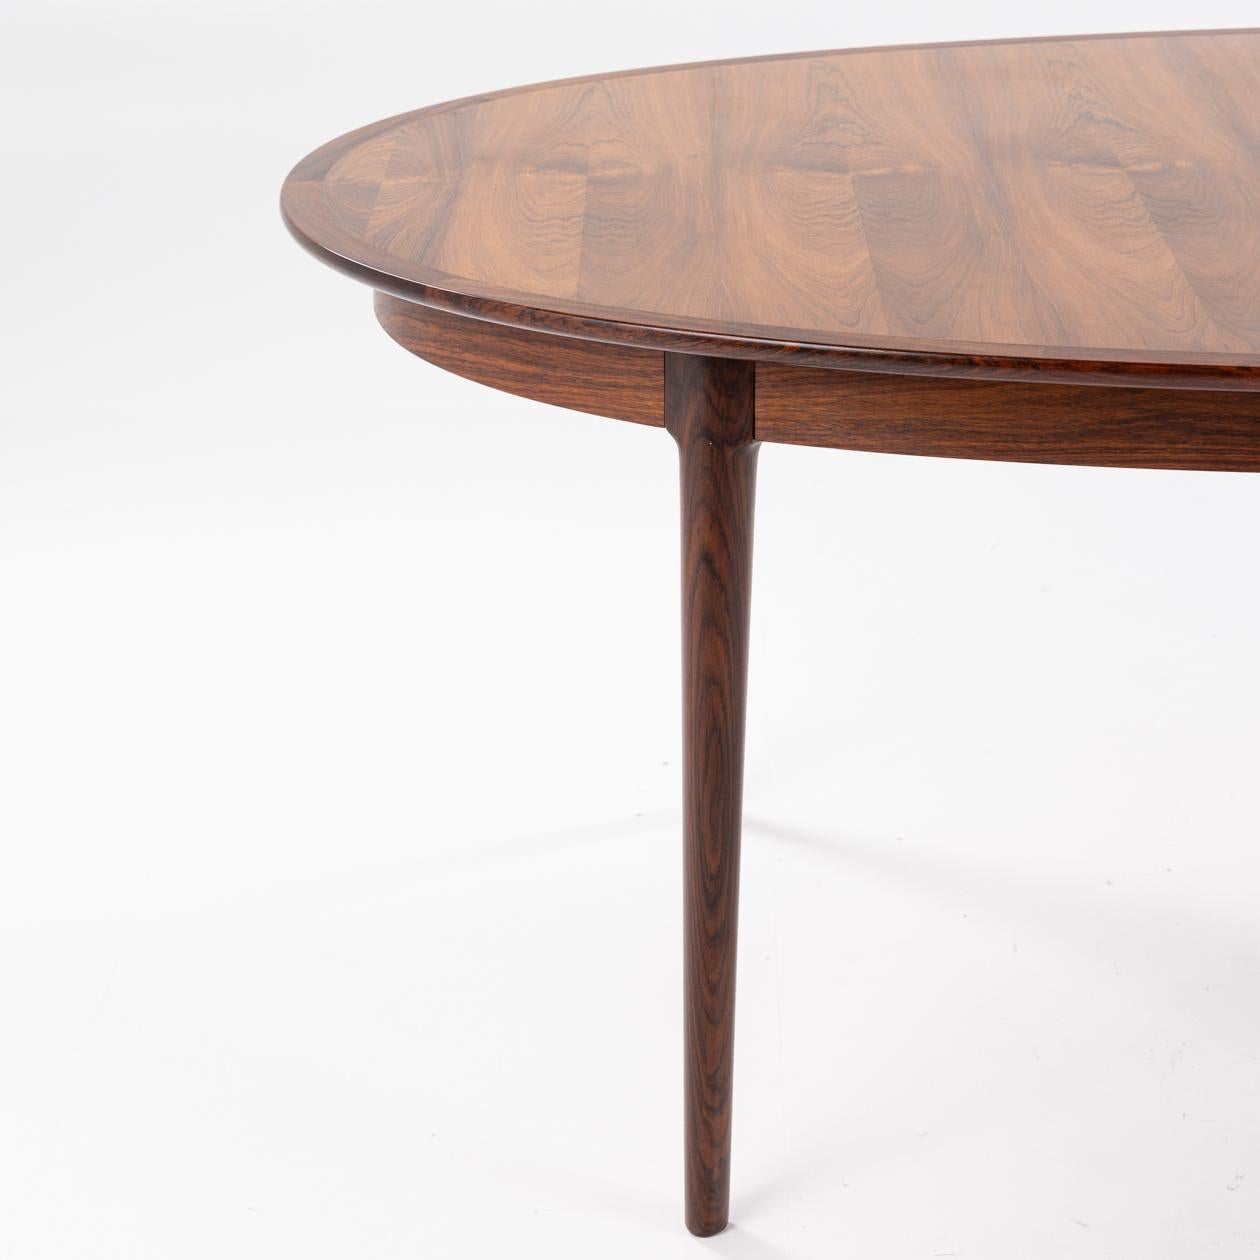 Oval rosewood dining table with two extension leaves. Original brand from manufacturer. Two plates of 50 cm. Torbjørn Afdal / Bruksbo